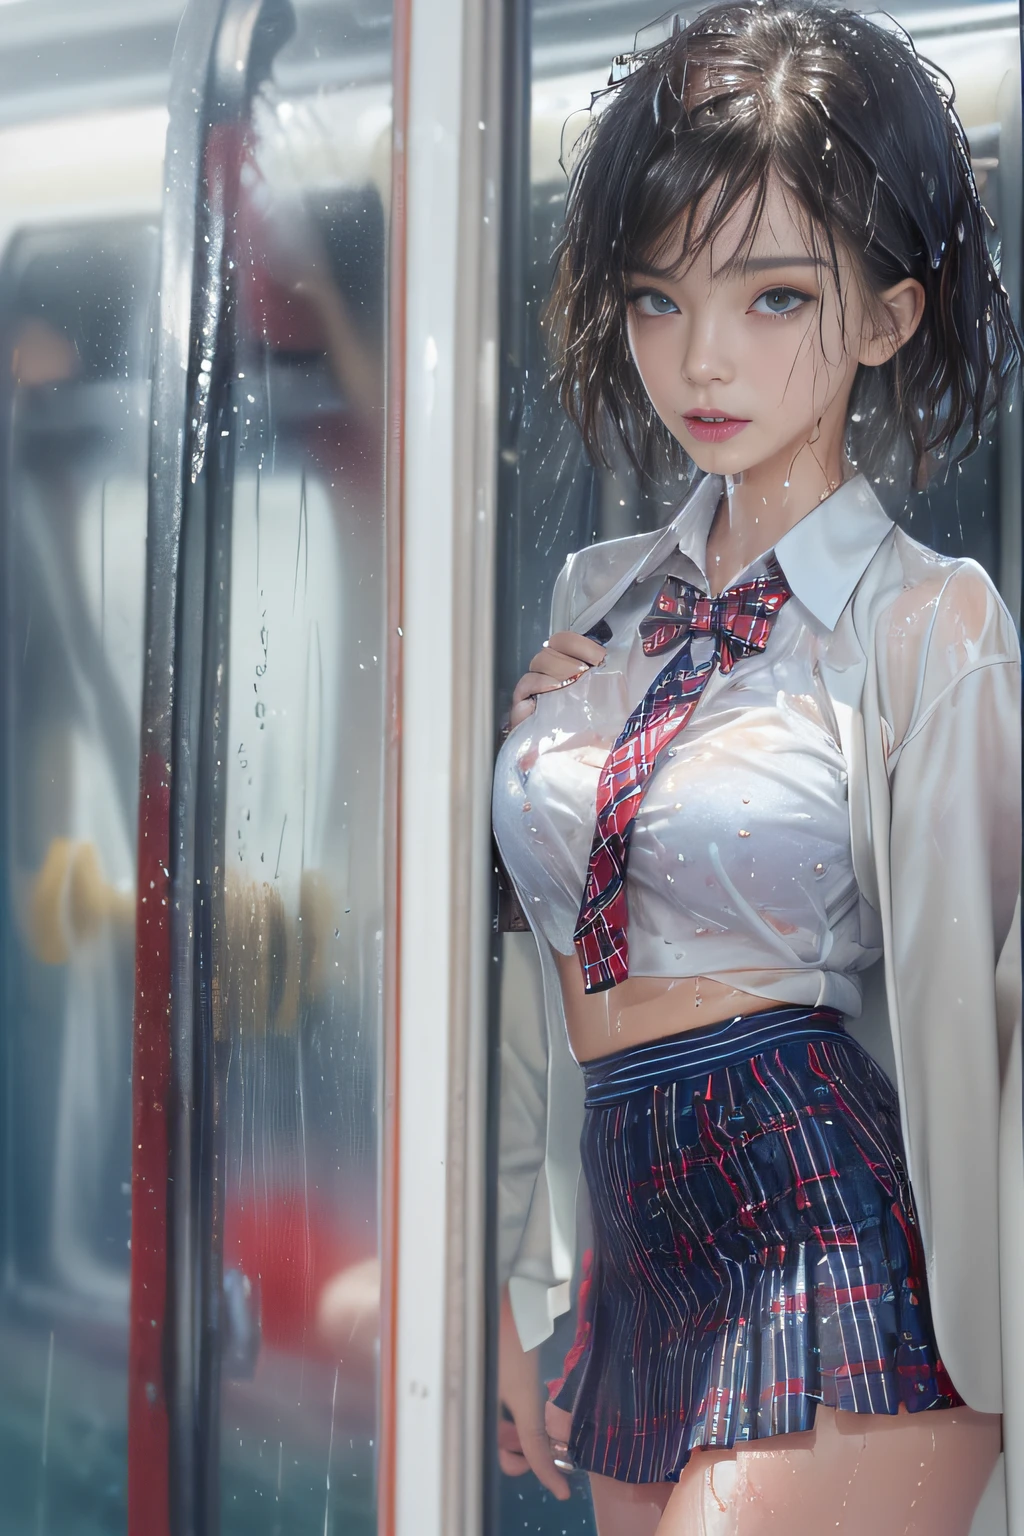 ((Schoolgirl standing in front of the door of a train)),((Wet white blazer))、((Wet translucent white blouse))、((red bowtie))、((Dark blue checked skirt)). 40k, Photography, masutepiece, Best Quality, cloudy ash sky, ((1 girl with beautiful eyes、Brown Light、Wet short hair, . White skin, Poses variadas.((breasts of medium size,:1.1)), Best Quality, masutepiece, Ultra high definition, (Photorealistic:1.4), Raw photo, (perfect body type), (slim:1.3), Slim abdomen, Perfect slim figure, dynamicposes, (((Full-figured :0.9))), Solo, Cold Light 12000K, Highly detailed facial and skin texture, Detailed eyes, Realistic eyes, Beautiful detailed eyes, (Realistic skin), Attractive, 超A high resolution, A hyper-realistic, Highly detailed,((she is soaking wet)),((No bra)),((Erection shows through))((posterior view)),((Looking back))